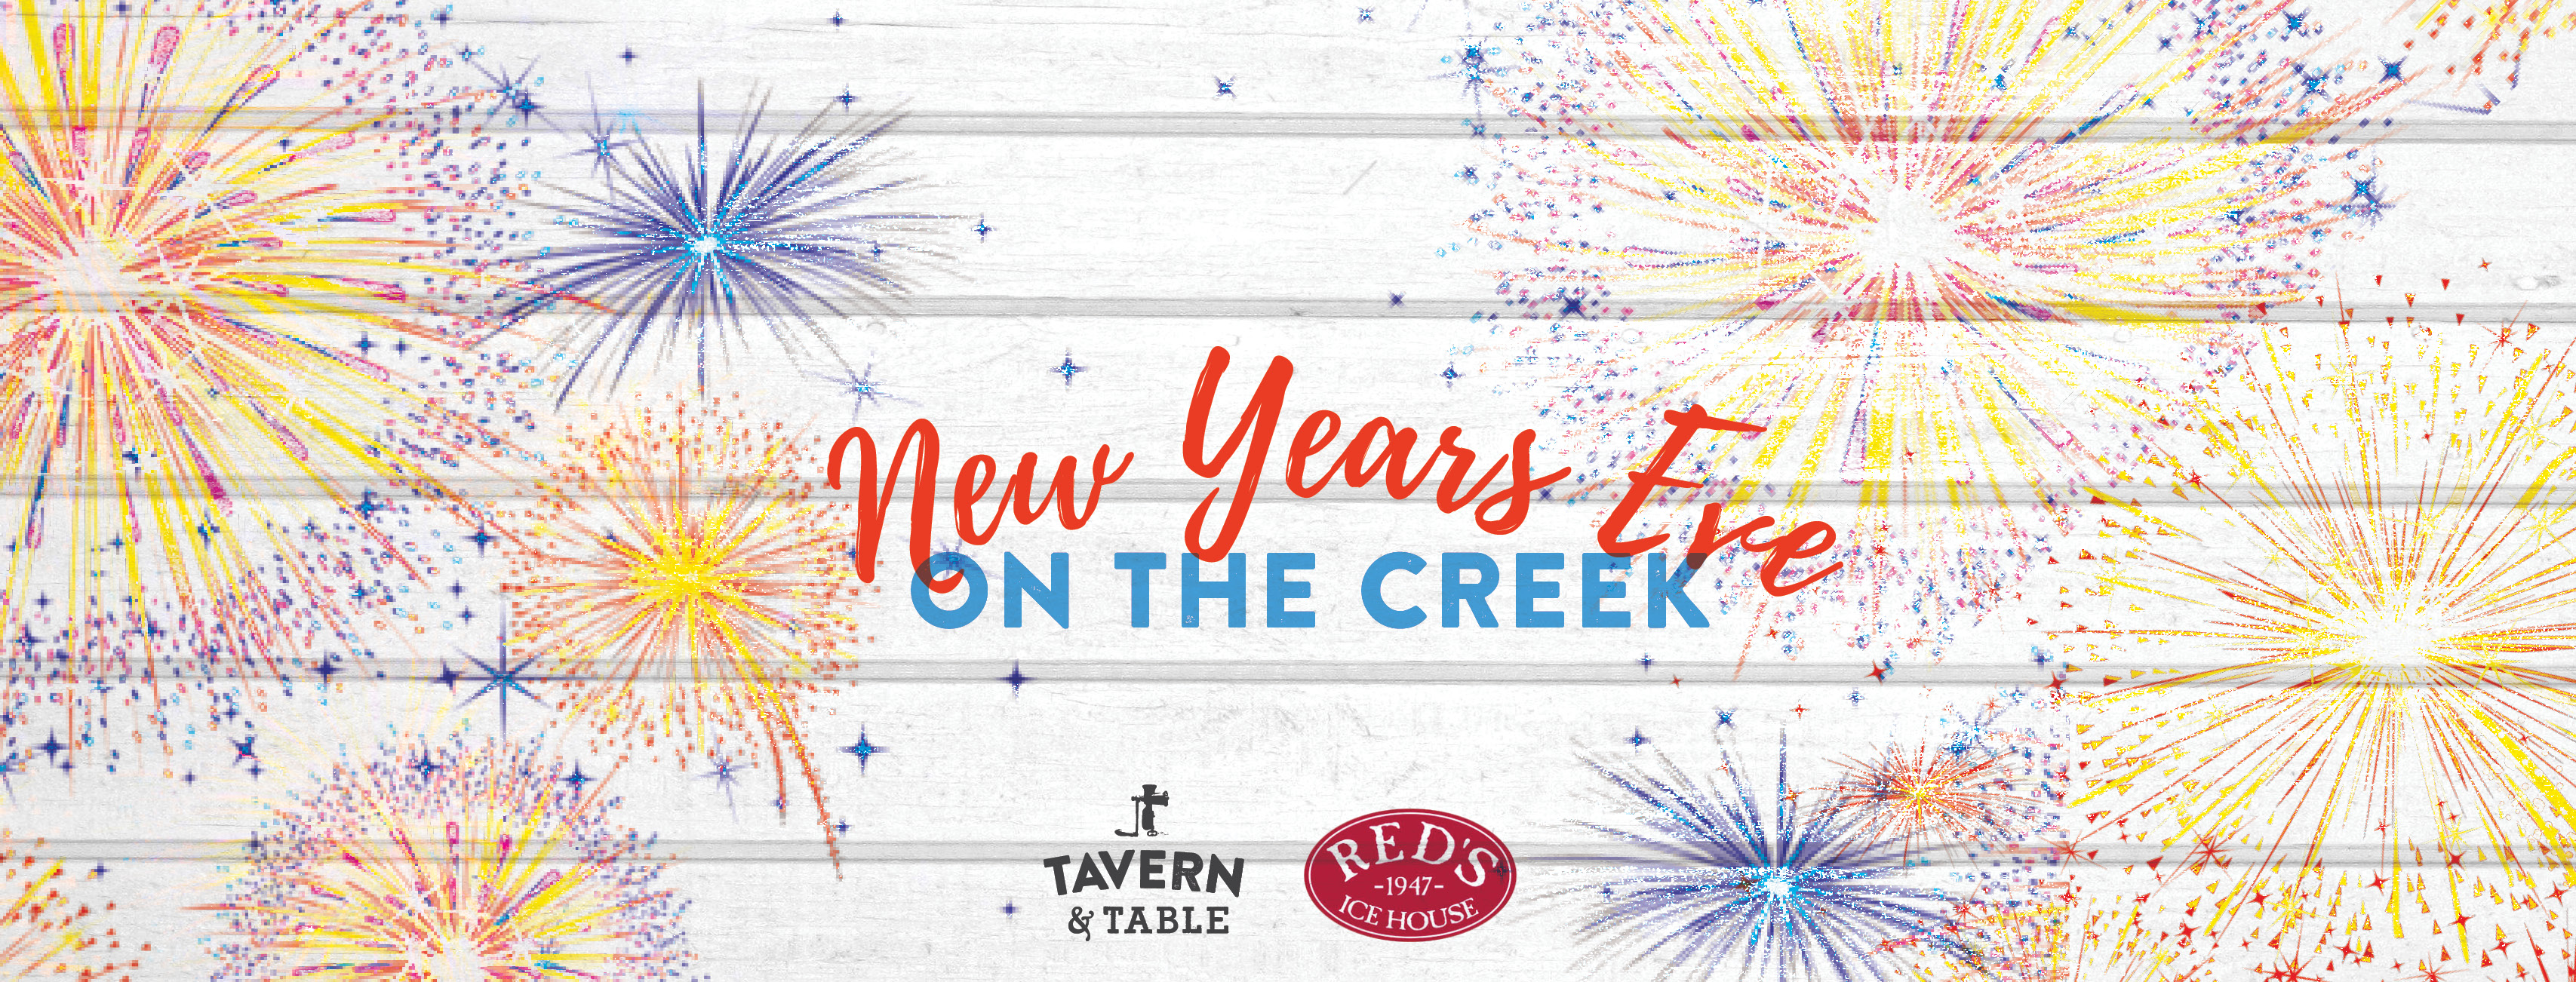 New Year's Eve on the Creek: Havana Nights Tickets, Tavern & Table and  Red's Ice House, Mount Pleasant, SC, Tue, Dec 31, 2019 at 9pm